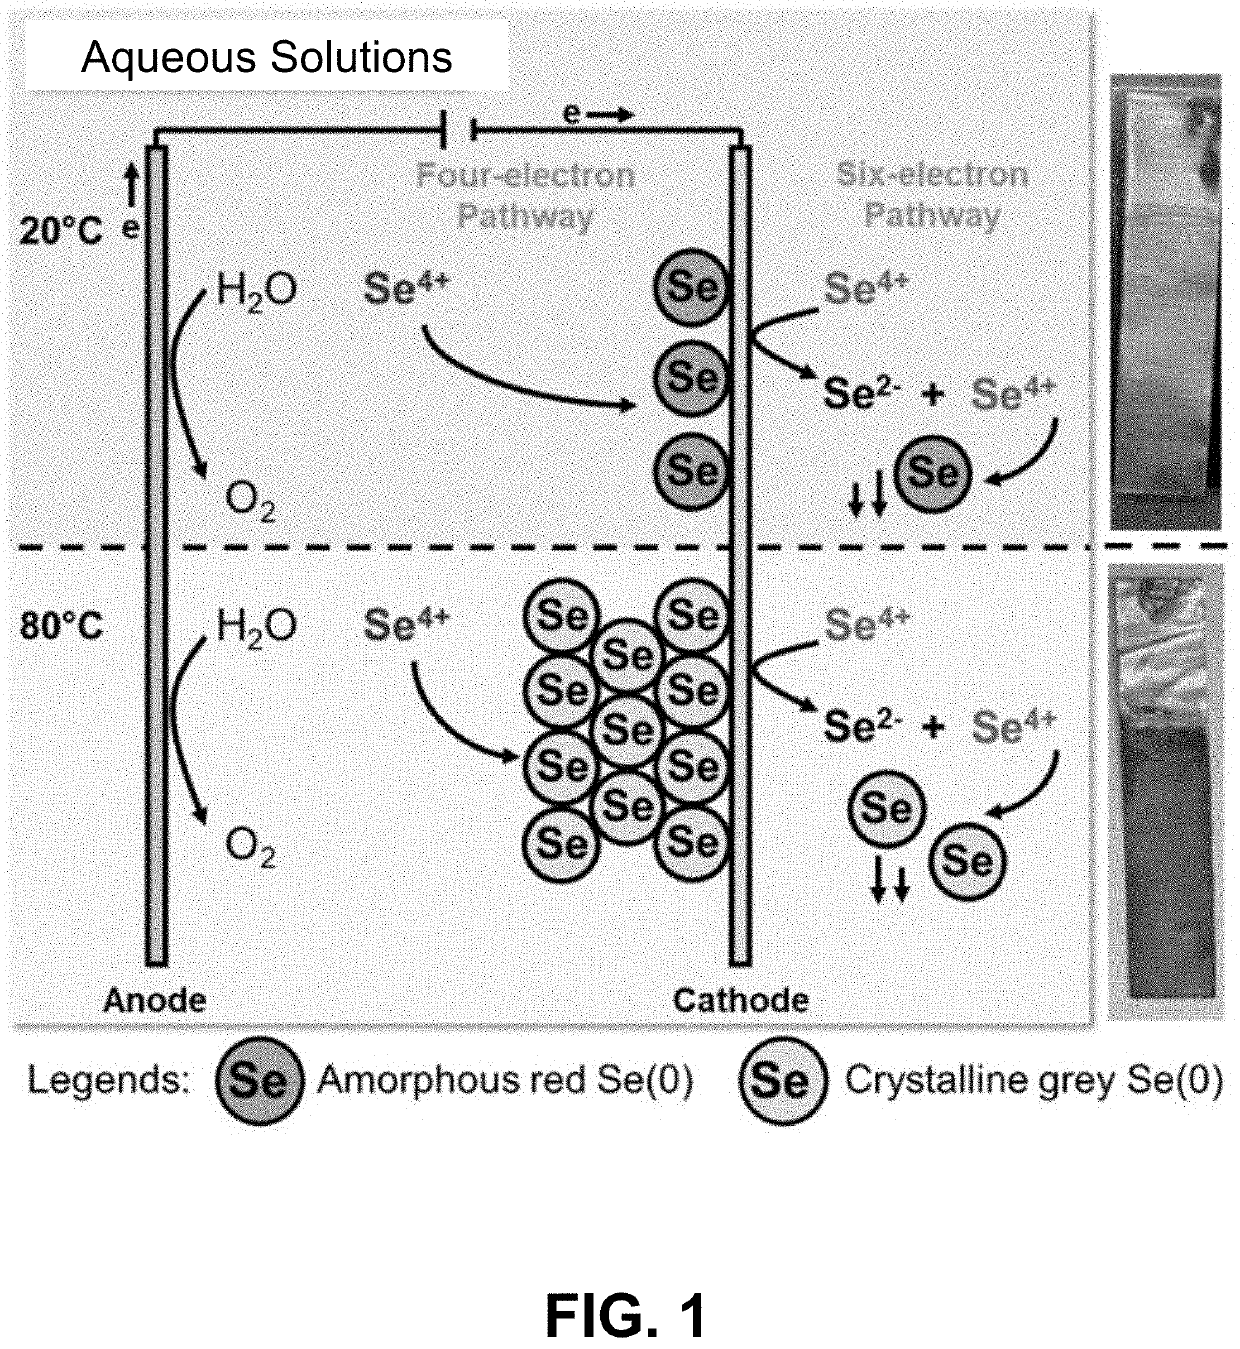 Direct electrochemical reduction method for removing selenium from wastewater